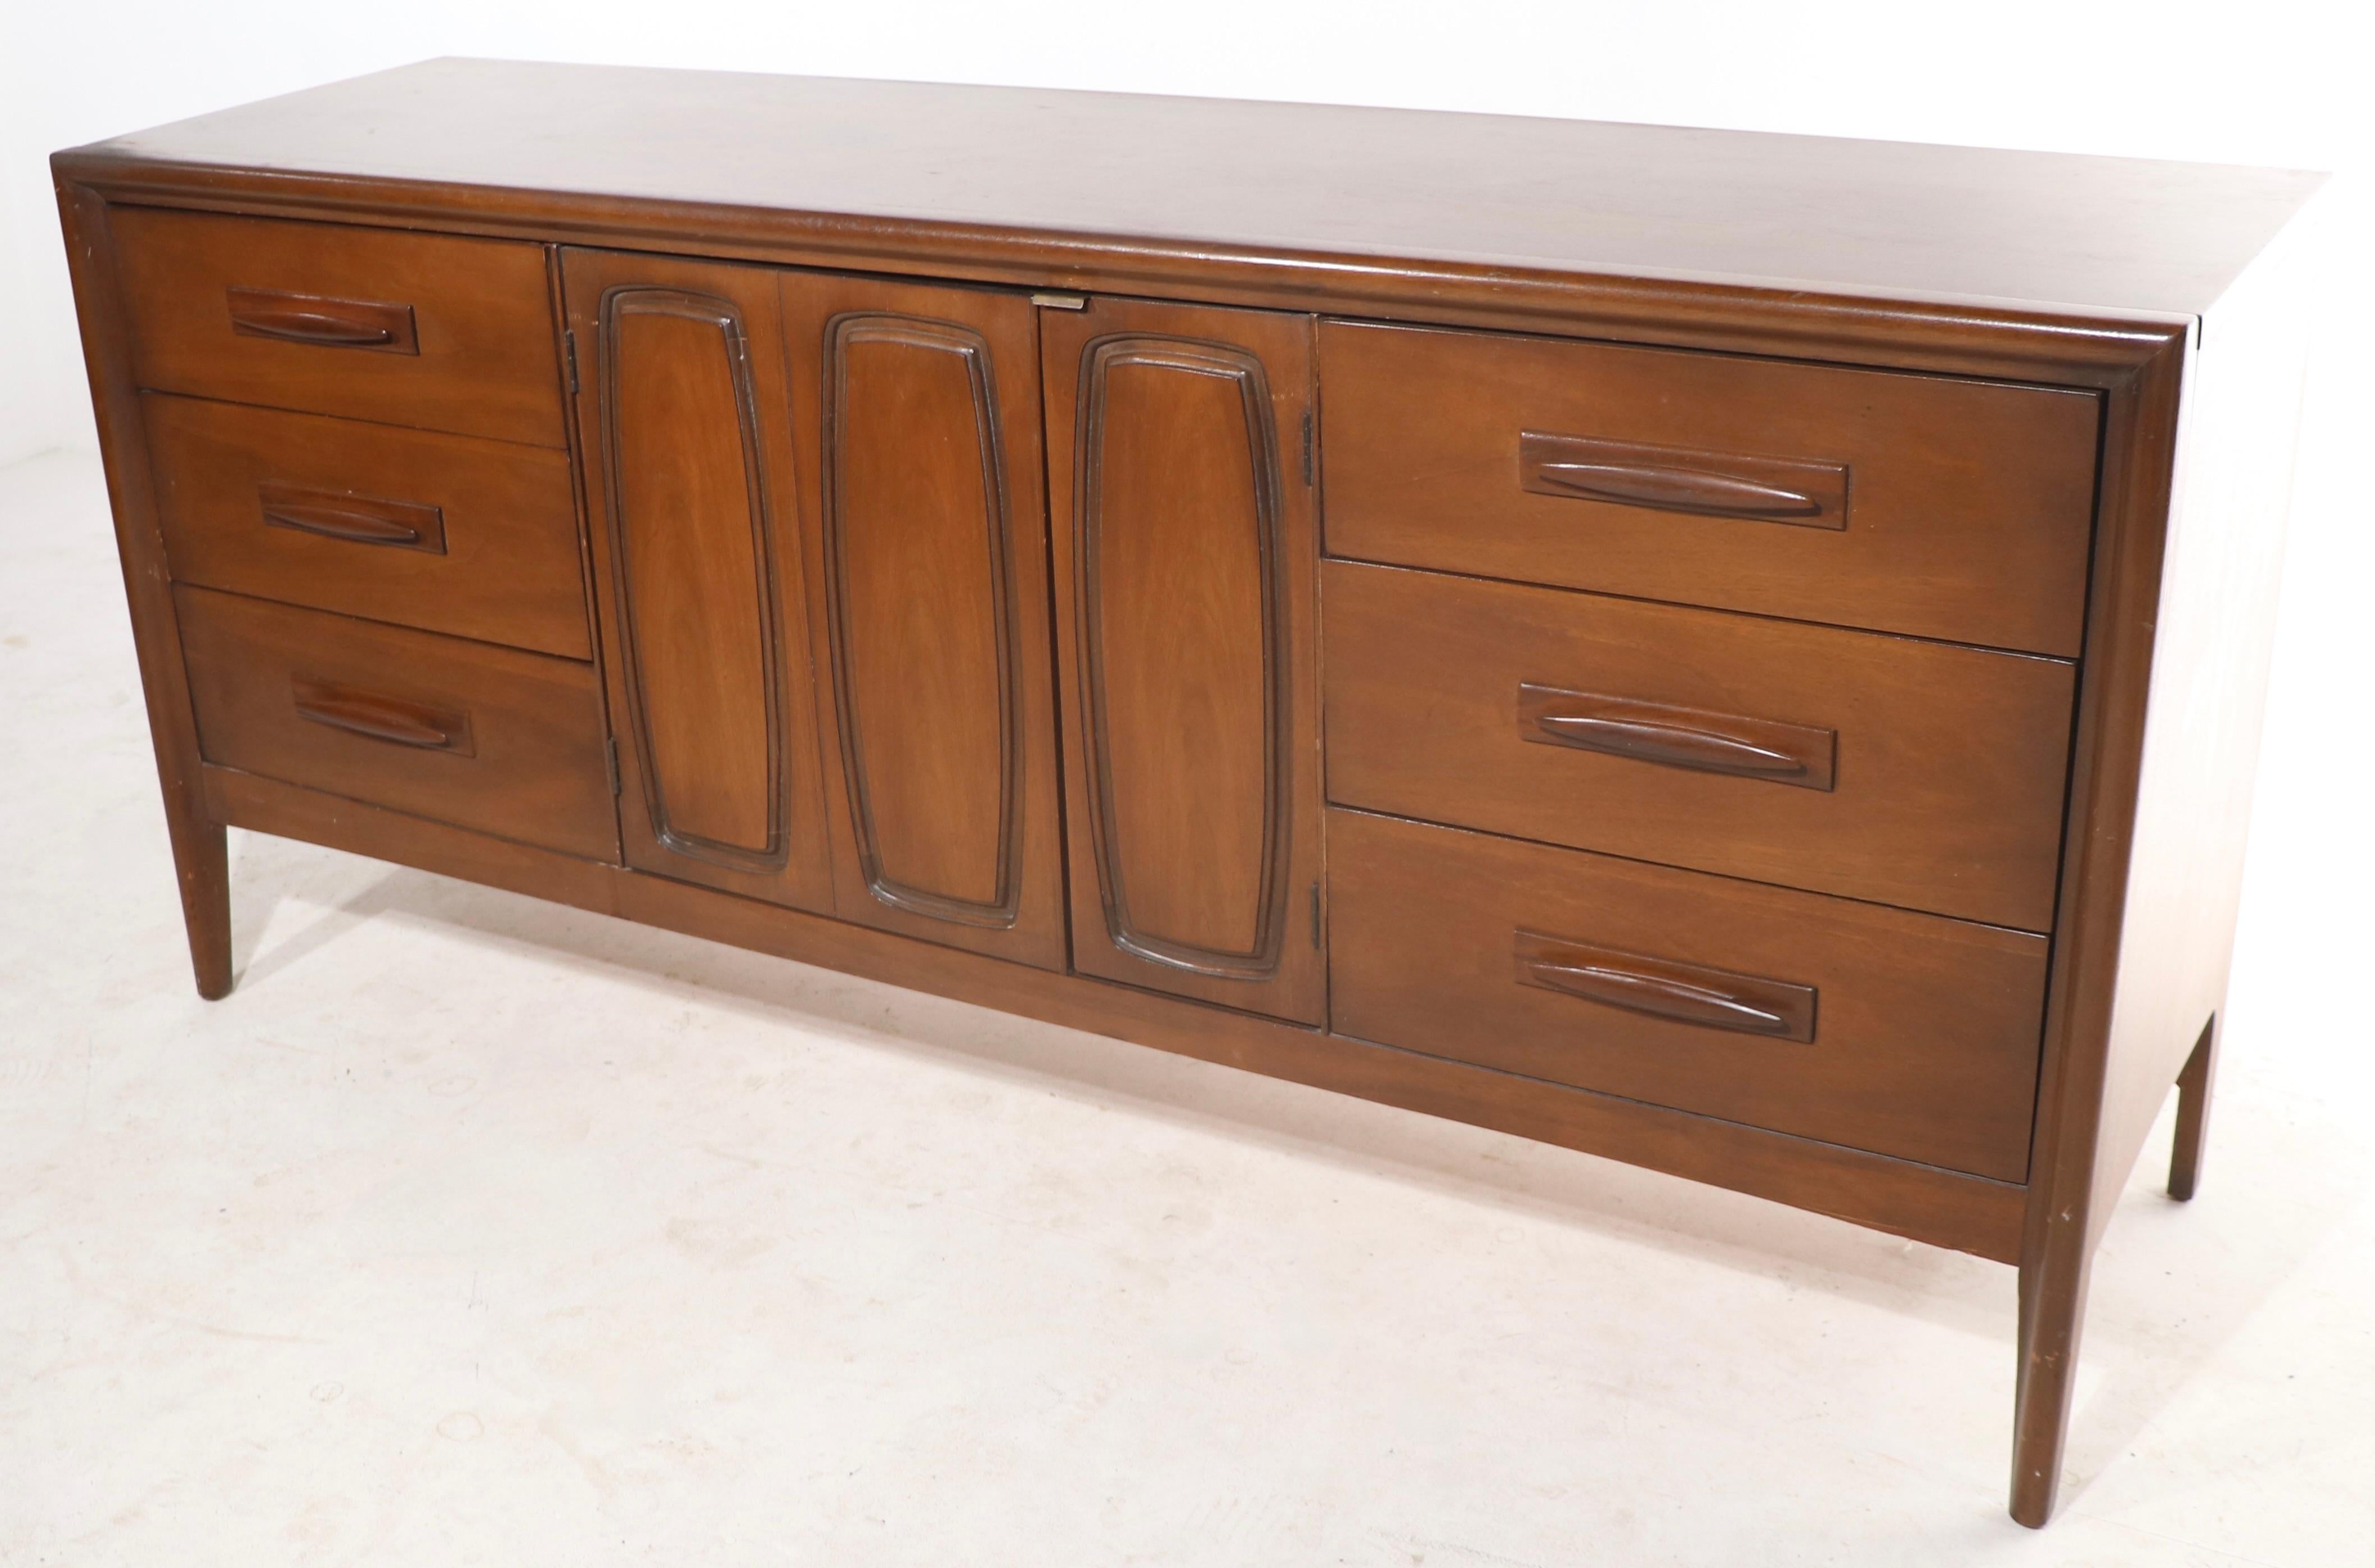 Classic American made mid century dresser, by the noted furniture company Broyhill, as part of their premier Emphasis collection. This example features two banks of drawers, each having an unusual sculpted wood pull, flanking doors which open to